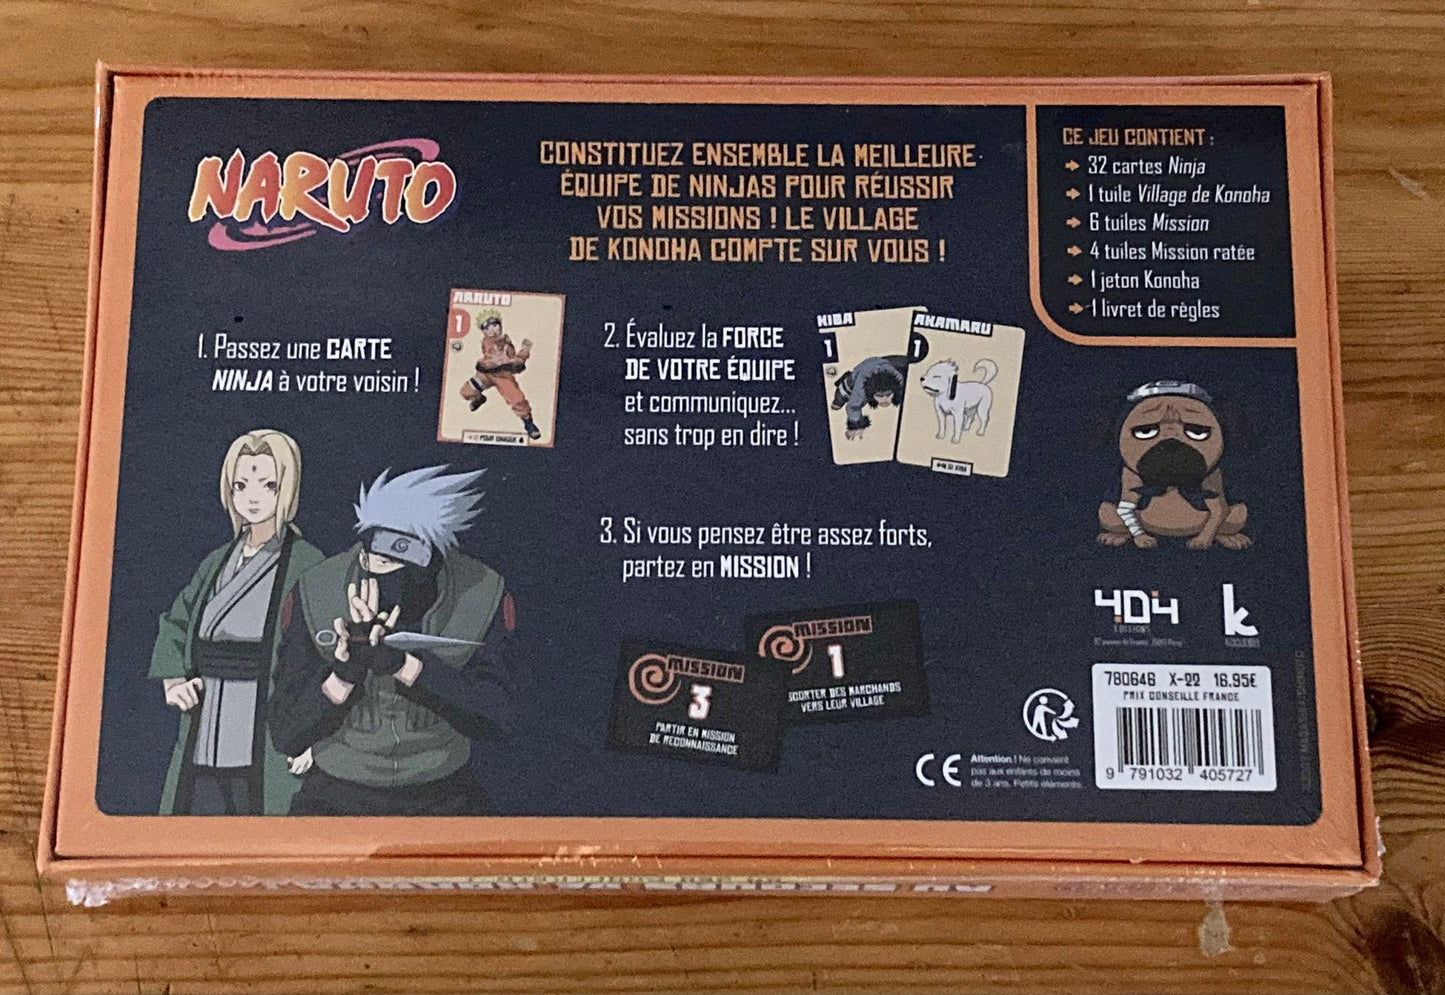 NARUTO THE GREAT OFFICIAL GAME TO THE RESCUE OF KONOHA!